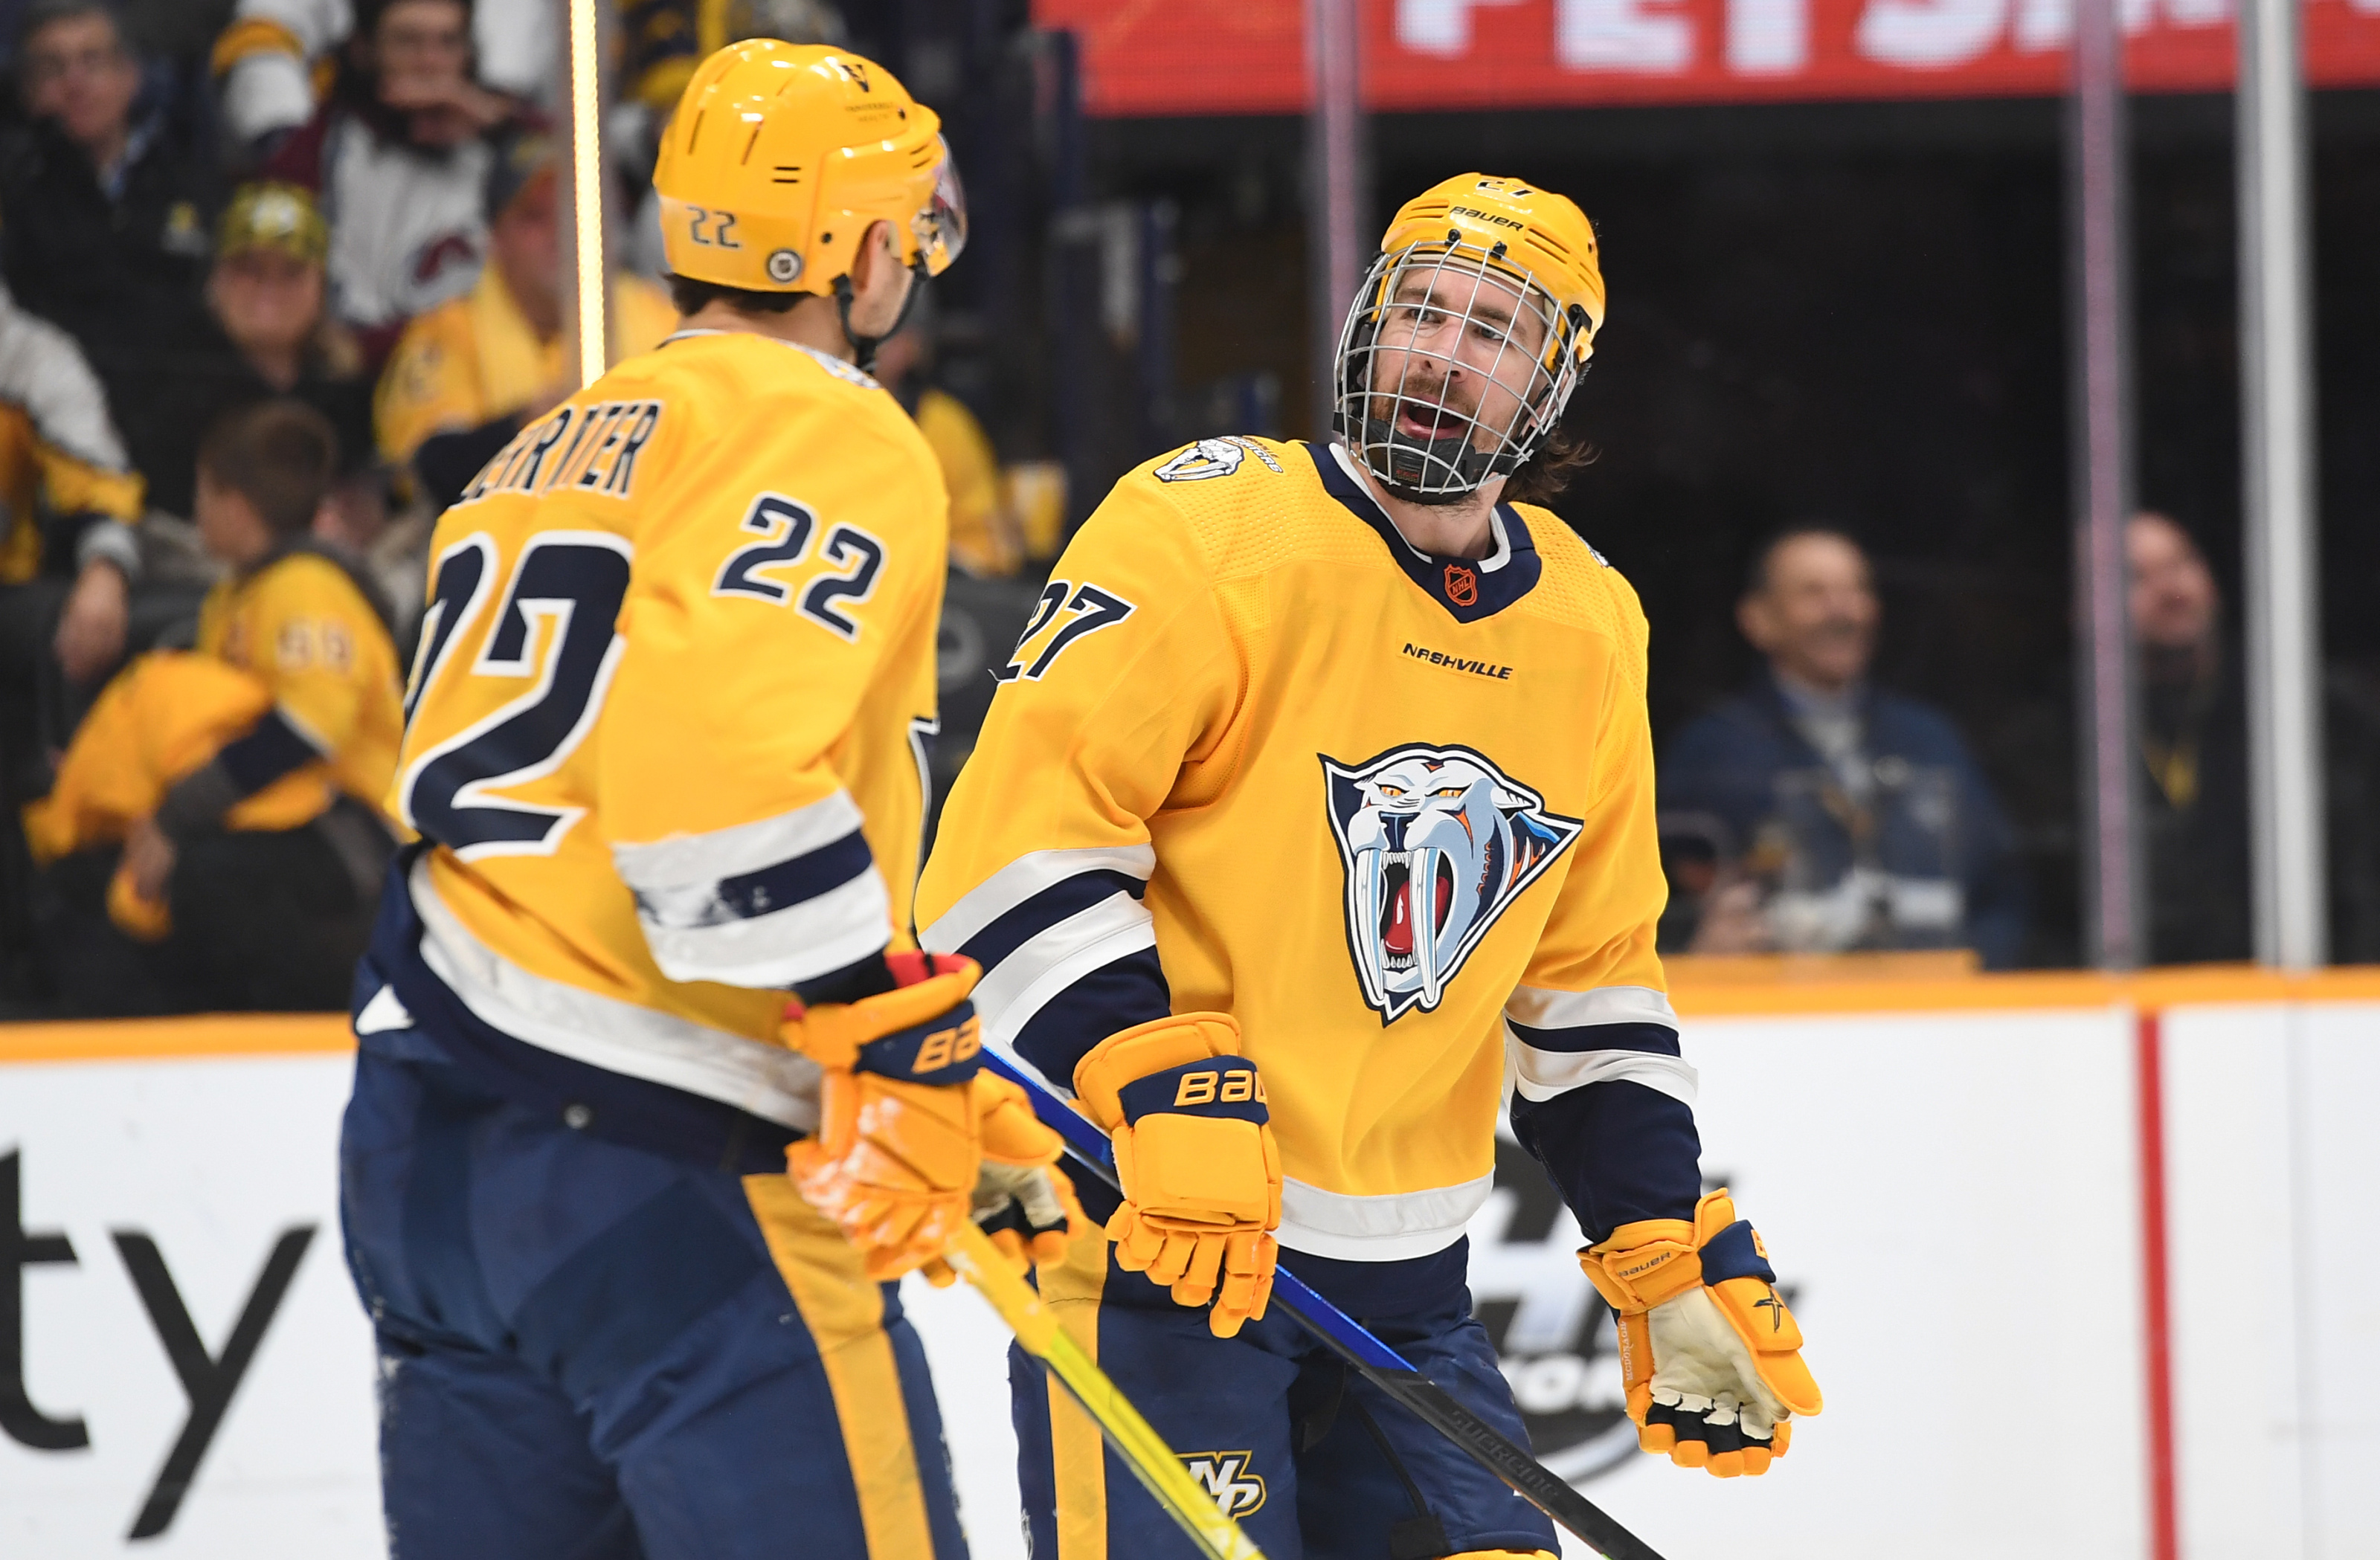 Predators Sign Niederreiter to Two-Year Deal - The Hockey News